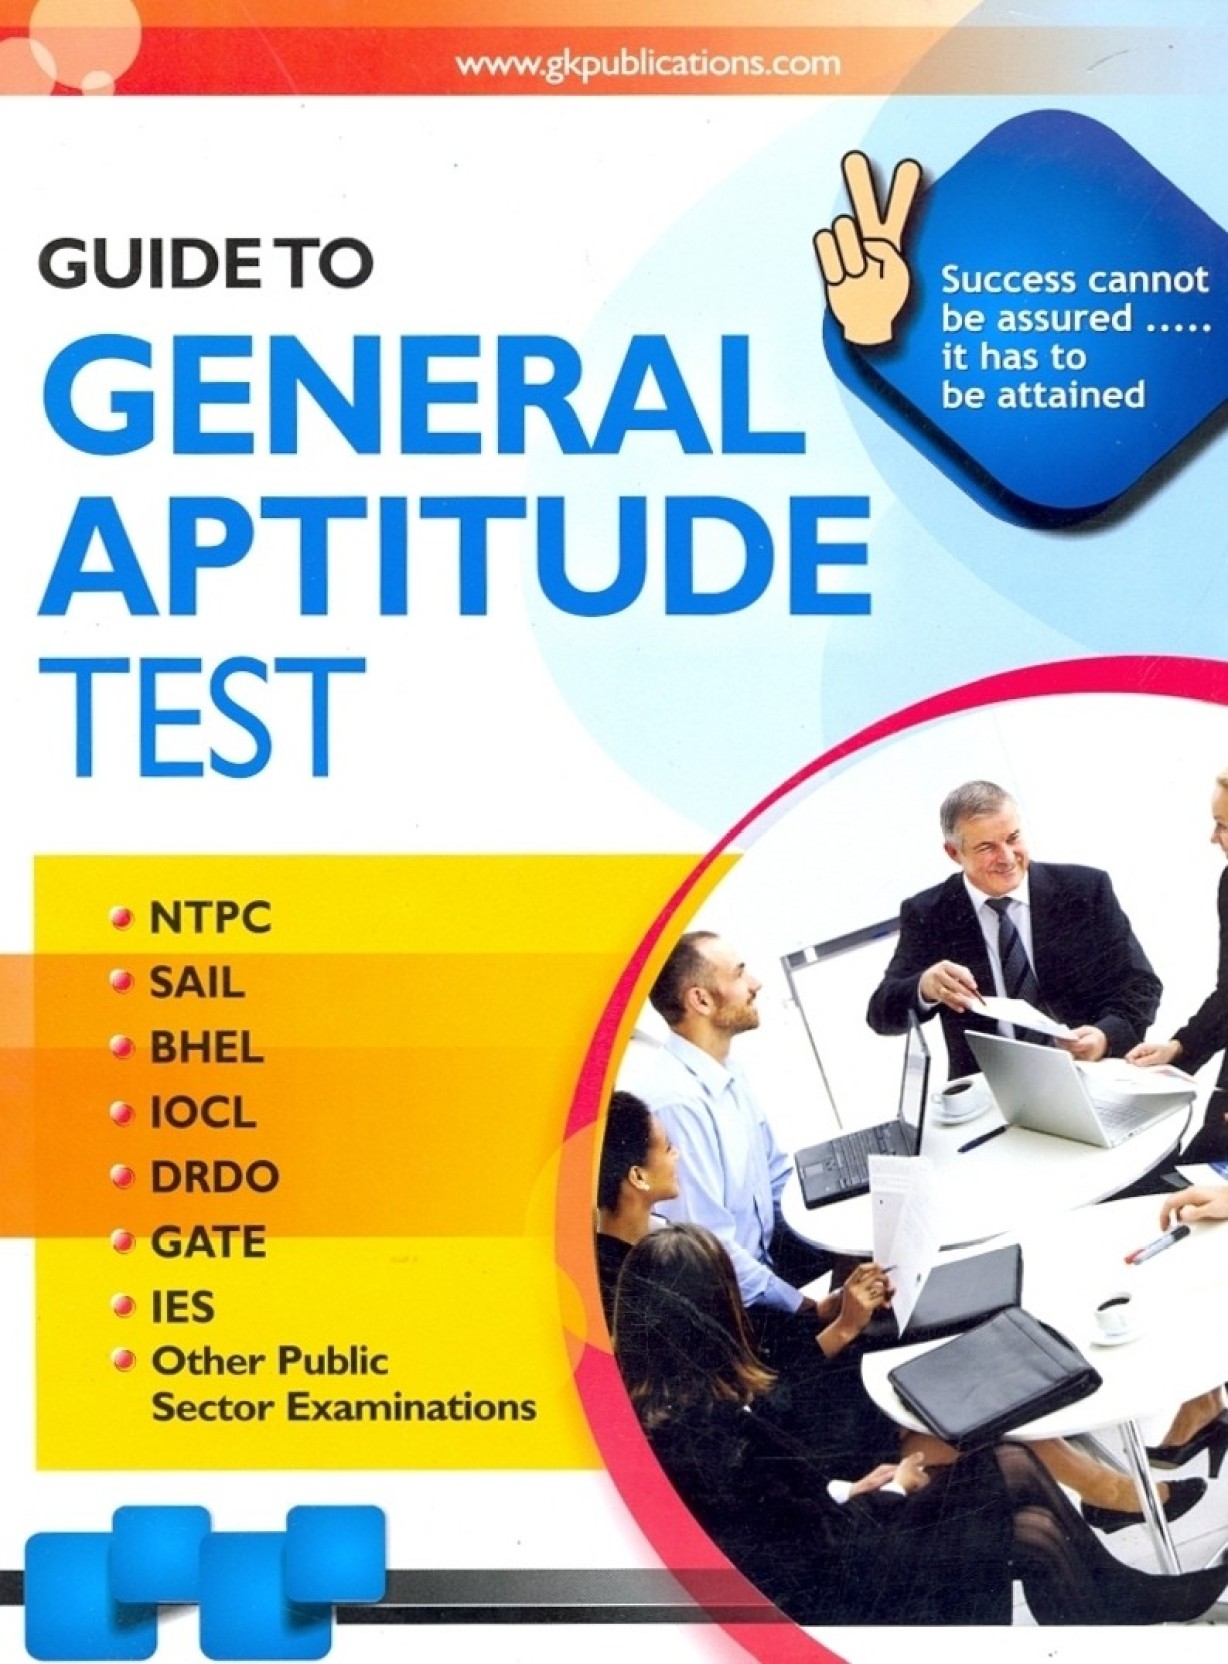 guide-to-general-aptitude-test-for-ntpc-bhel-sail-pdf